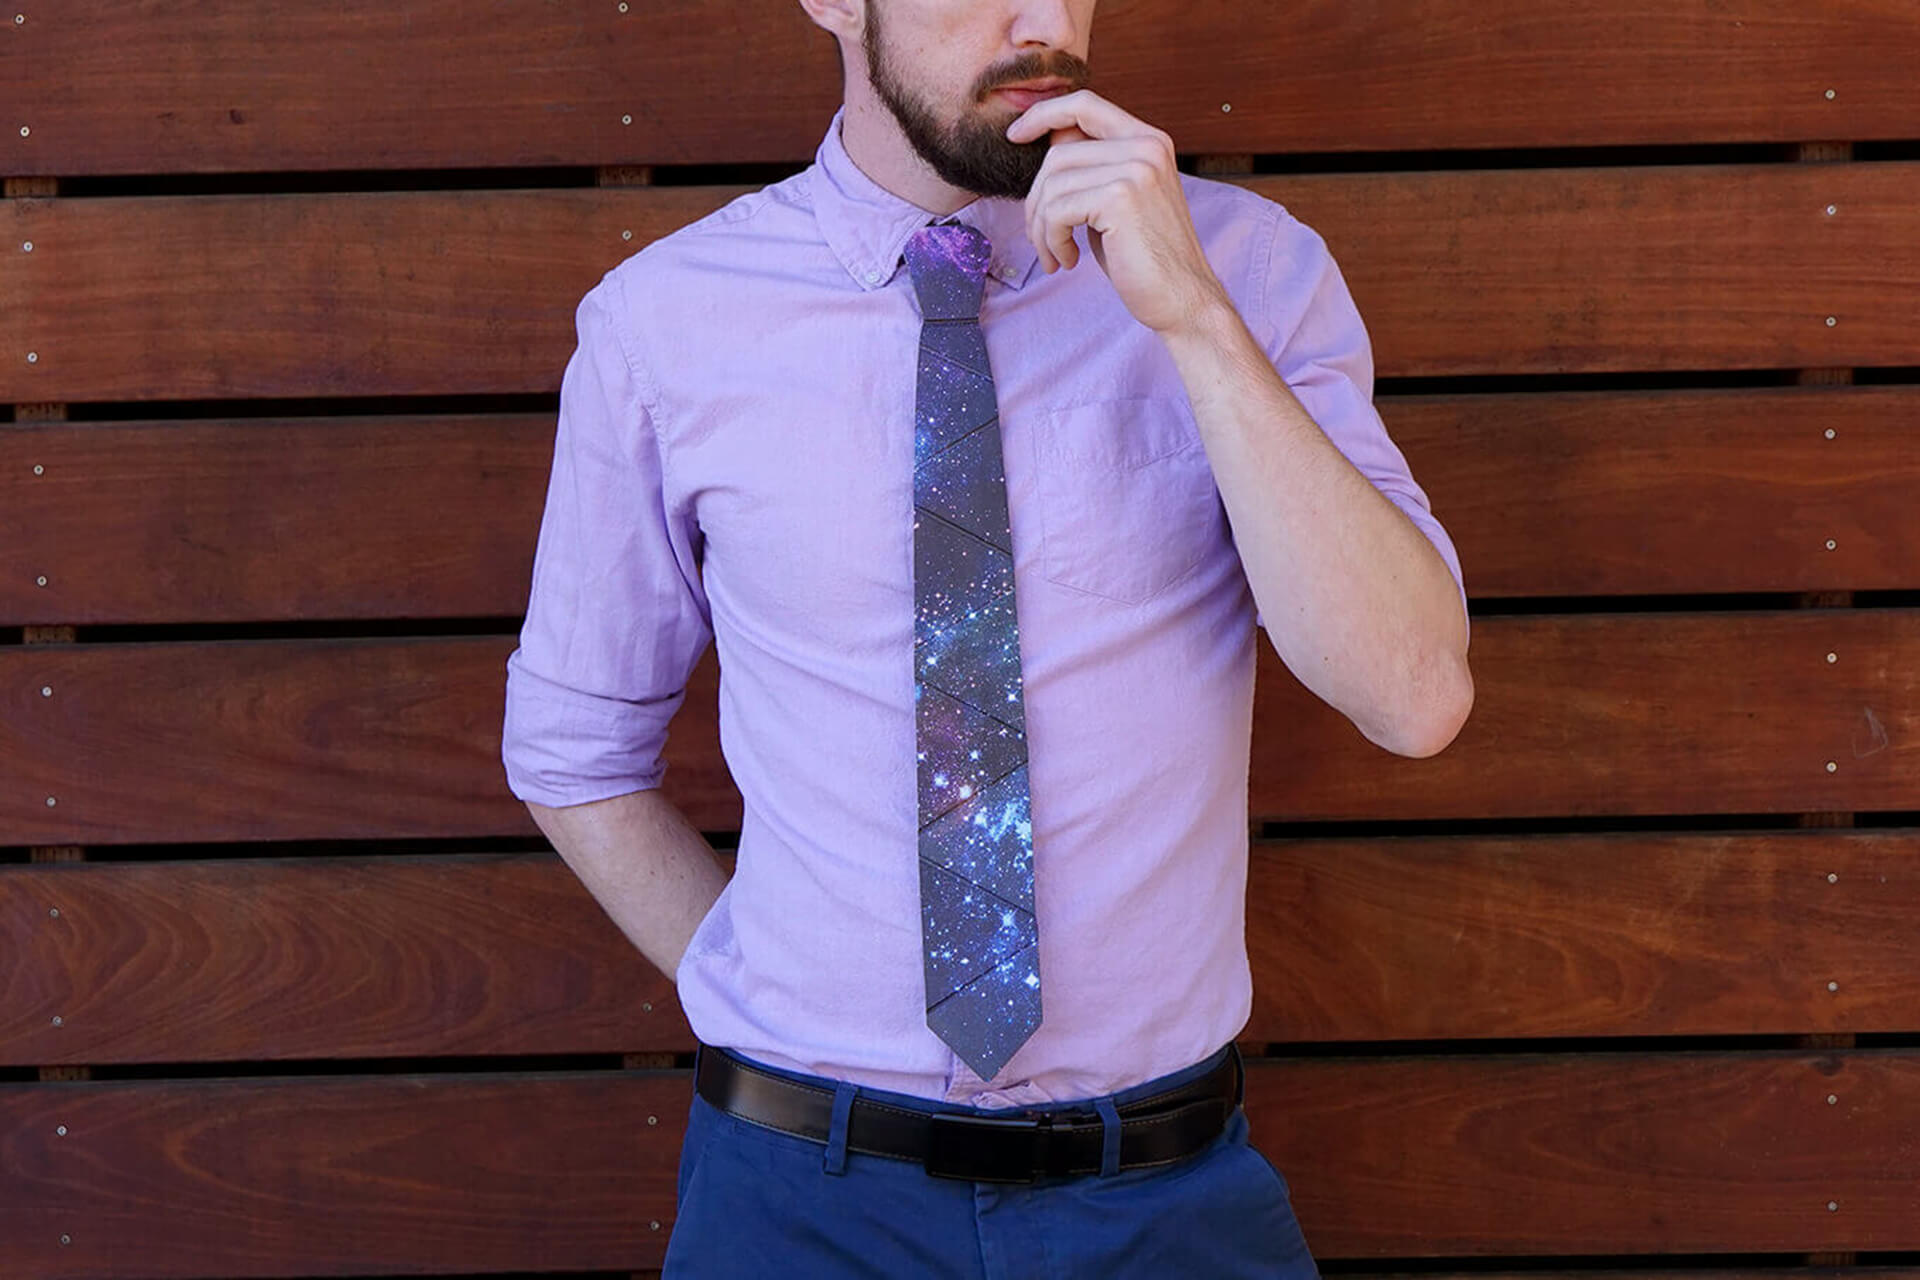 A lifestyle shot of the cardboard galaxy tie